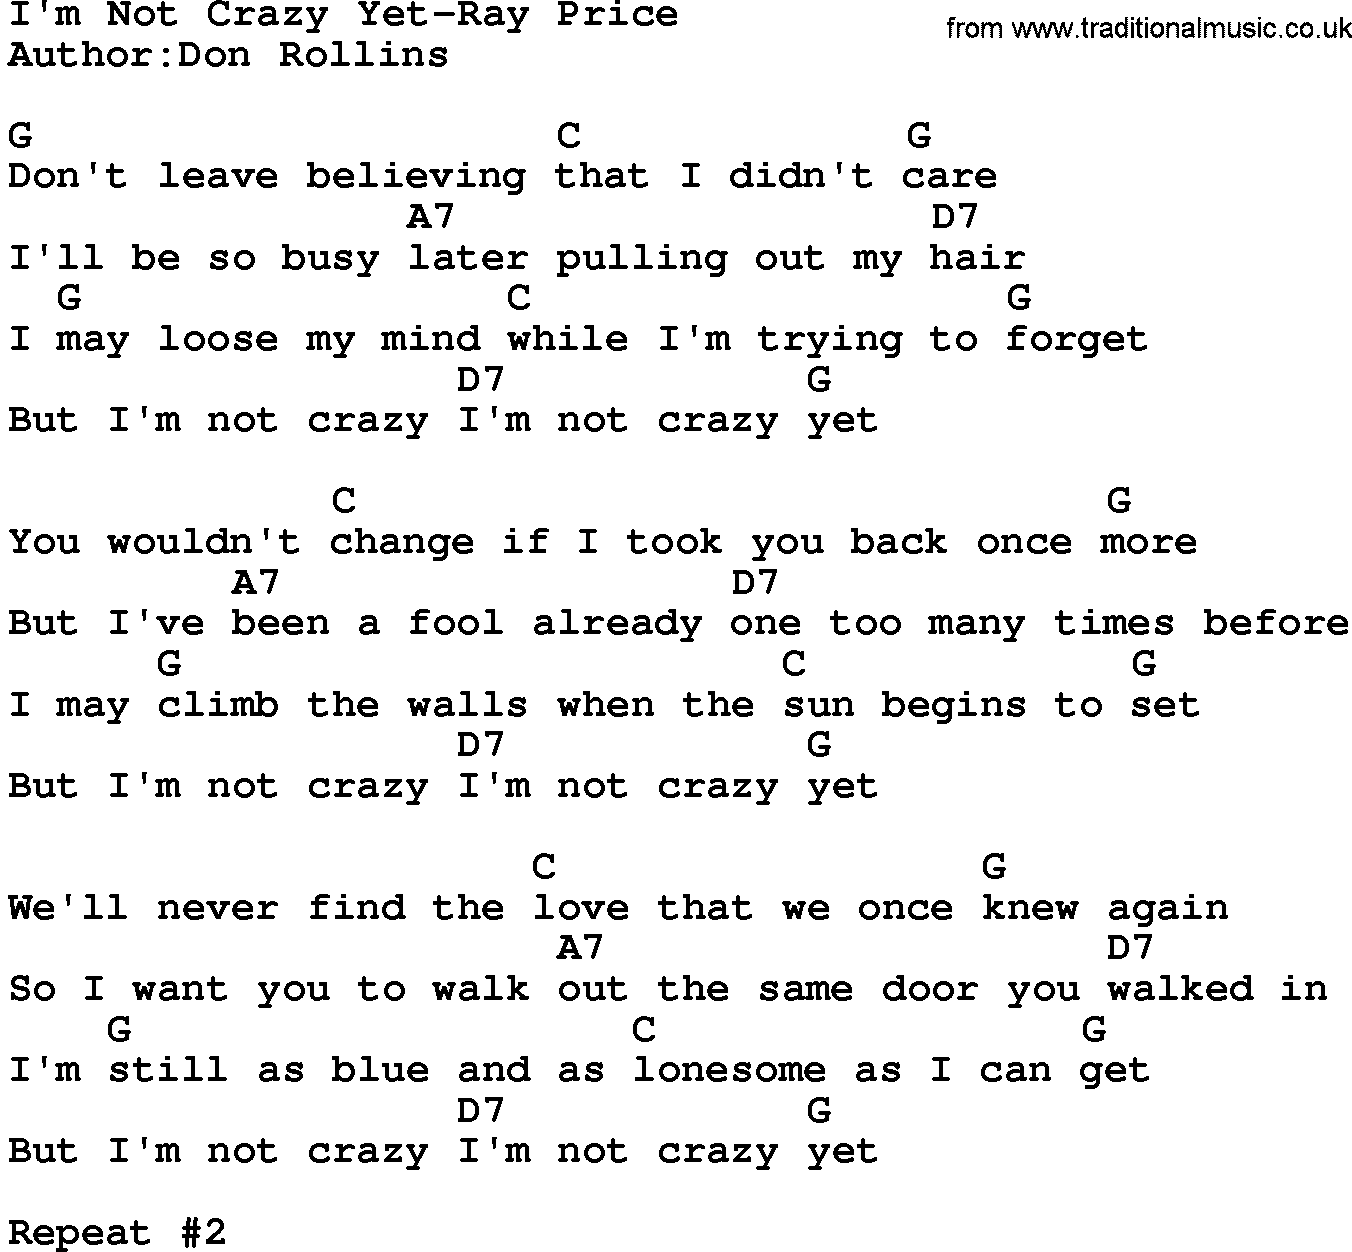 Country music song: I'm Not Crazy Yet-Ray Price lyrics and chords